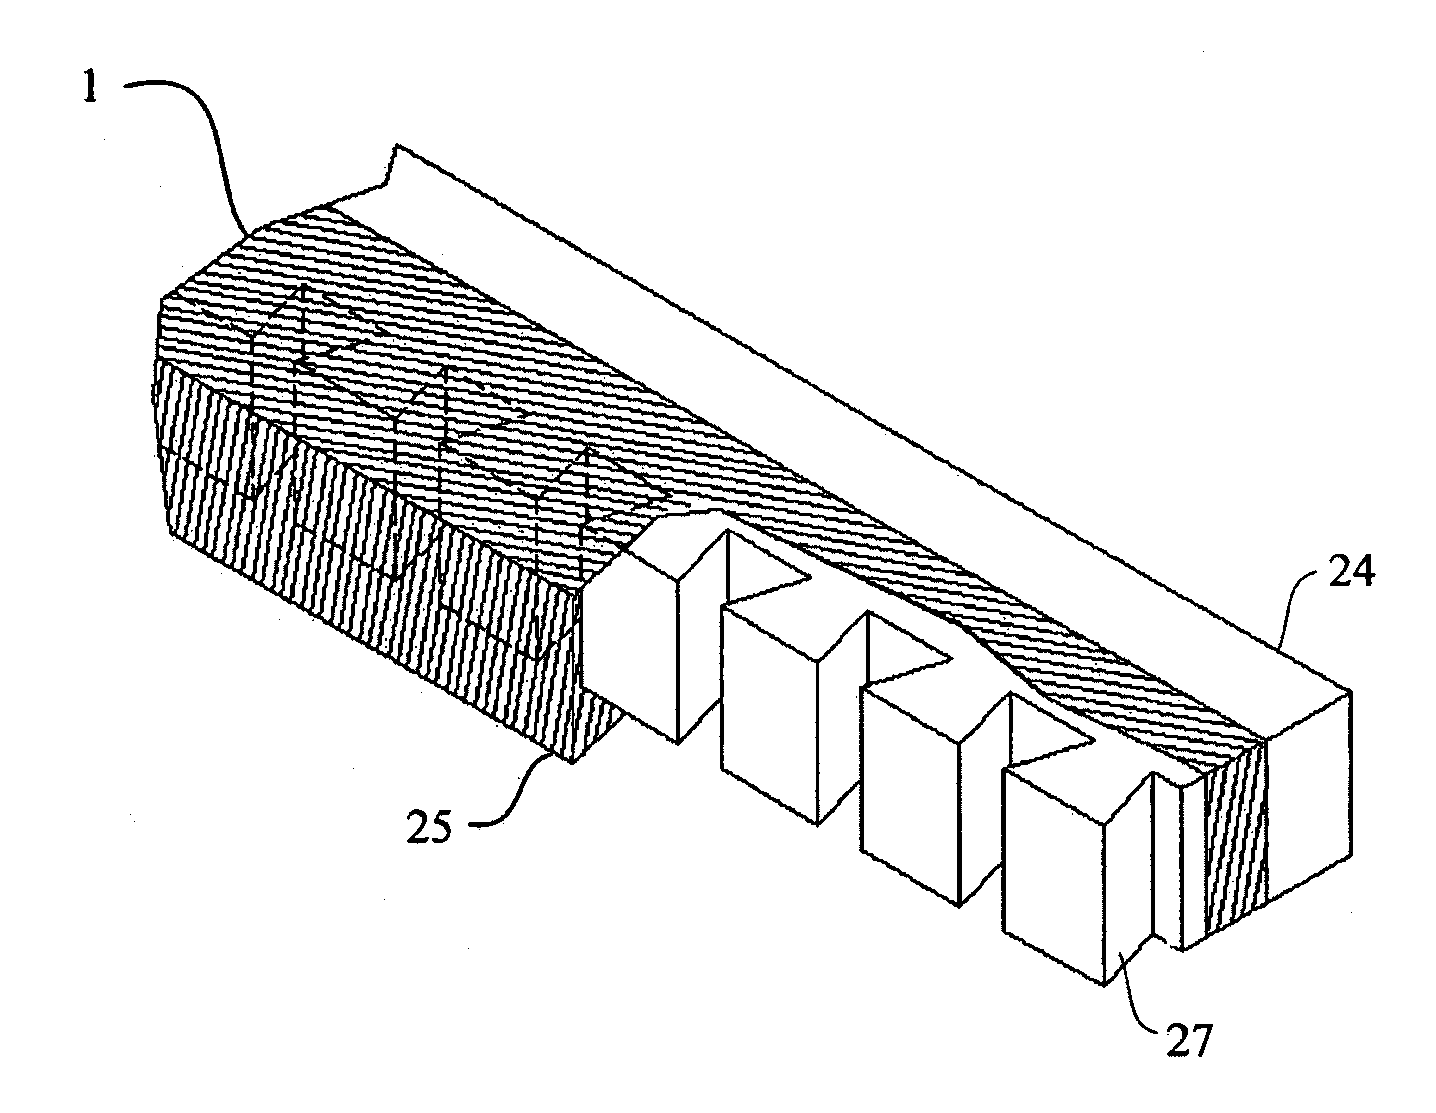 Method for fabricating lateral-moving micromachined thermal bimorph